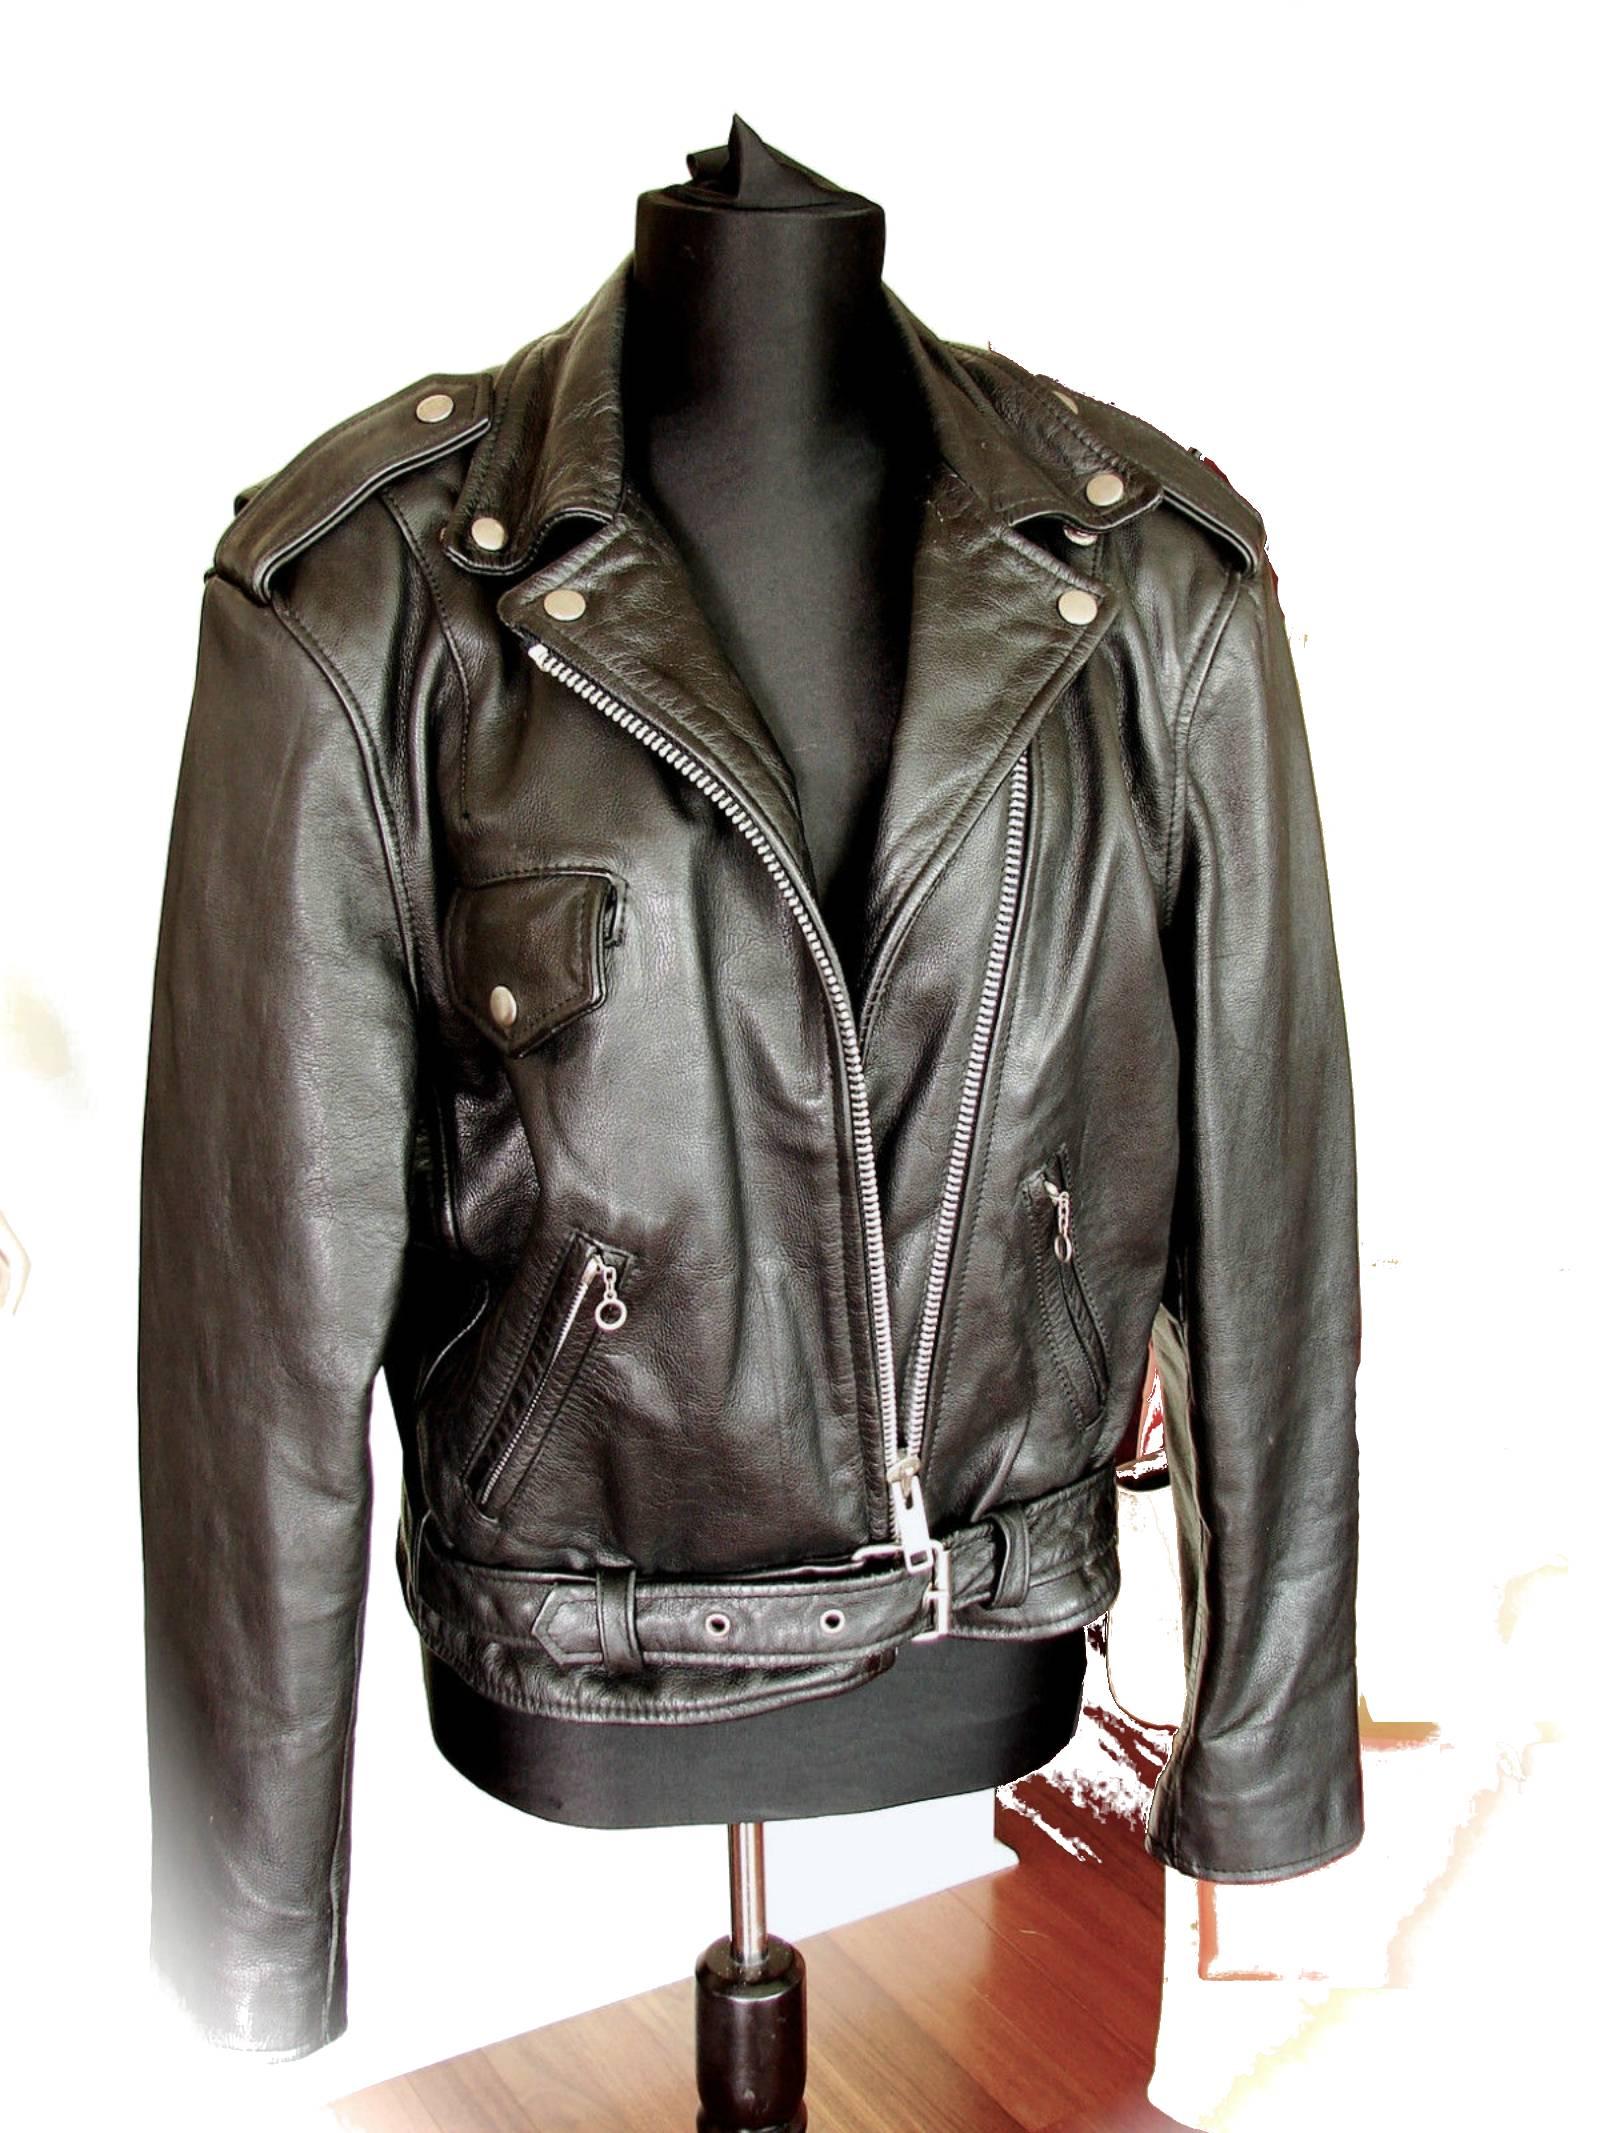 Here's a true vintage, ladies black leather biker jacket! There's no label, aside from a single 